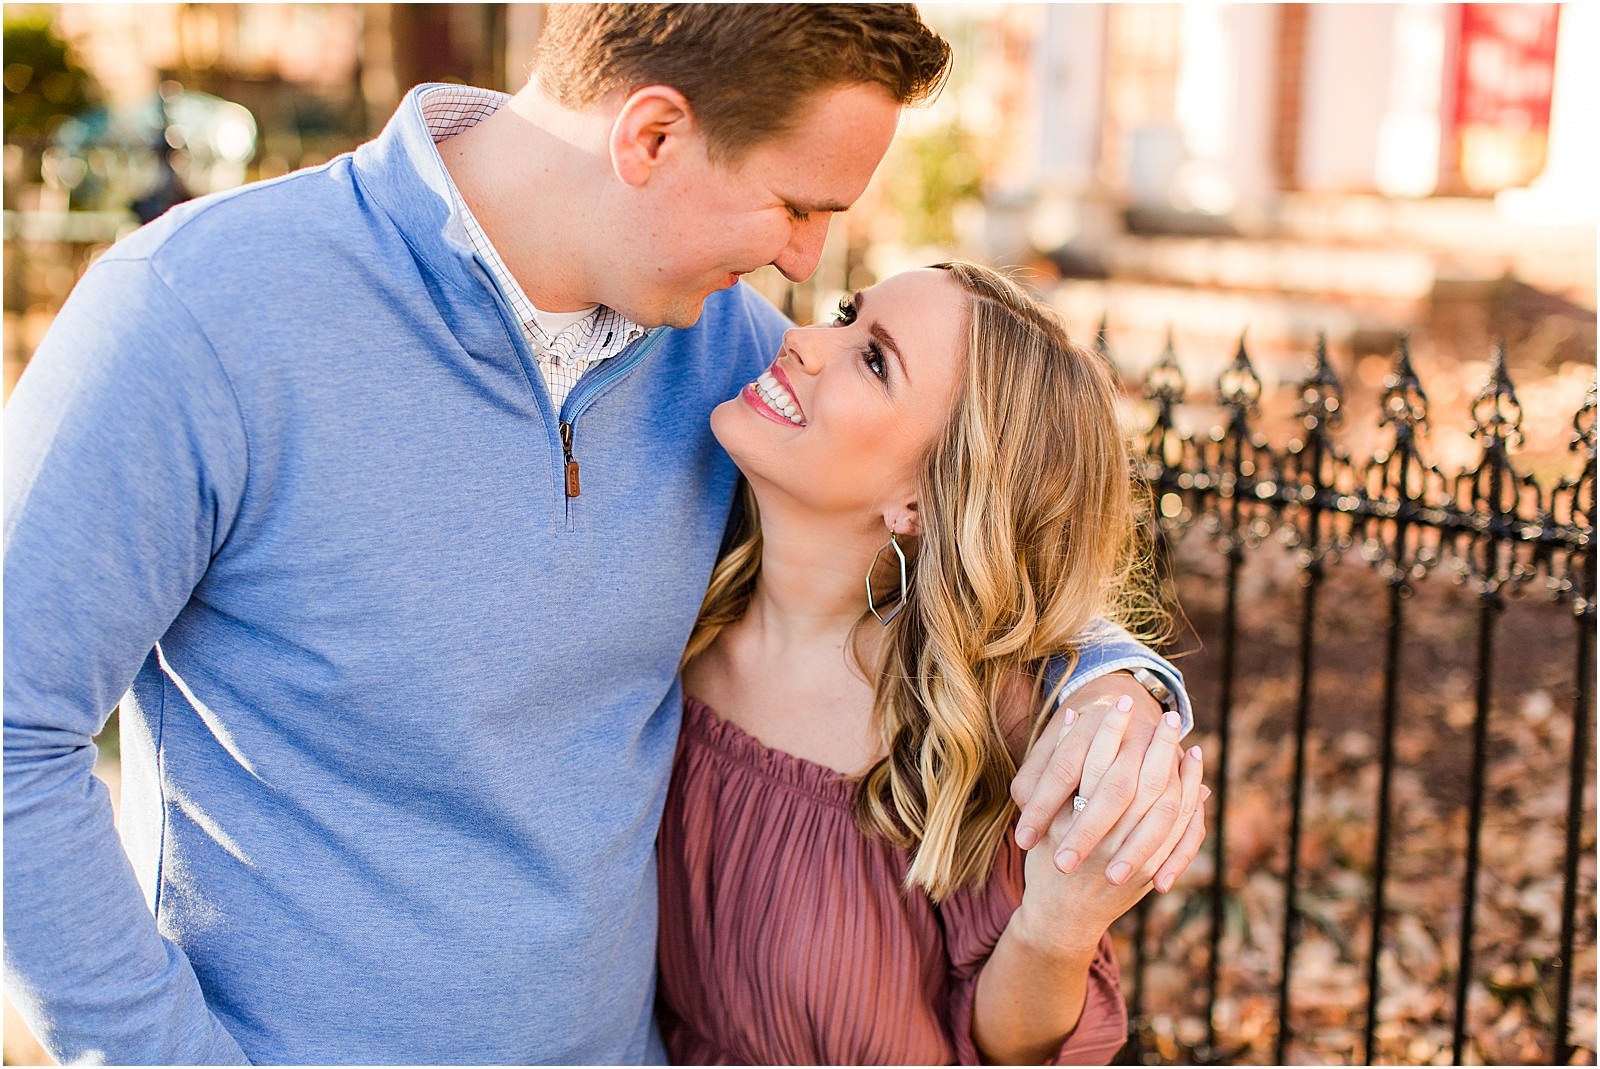 Madison and Christaan | A 20 West Engagement Session in Downto wn Newburgh | Bret and Brandie Photography027.jpg